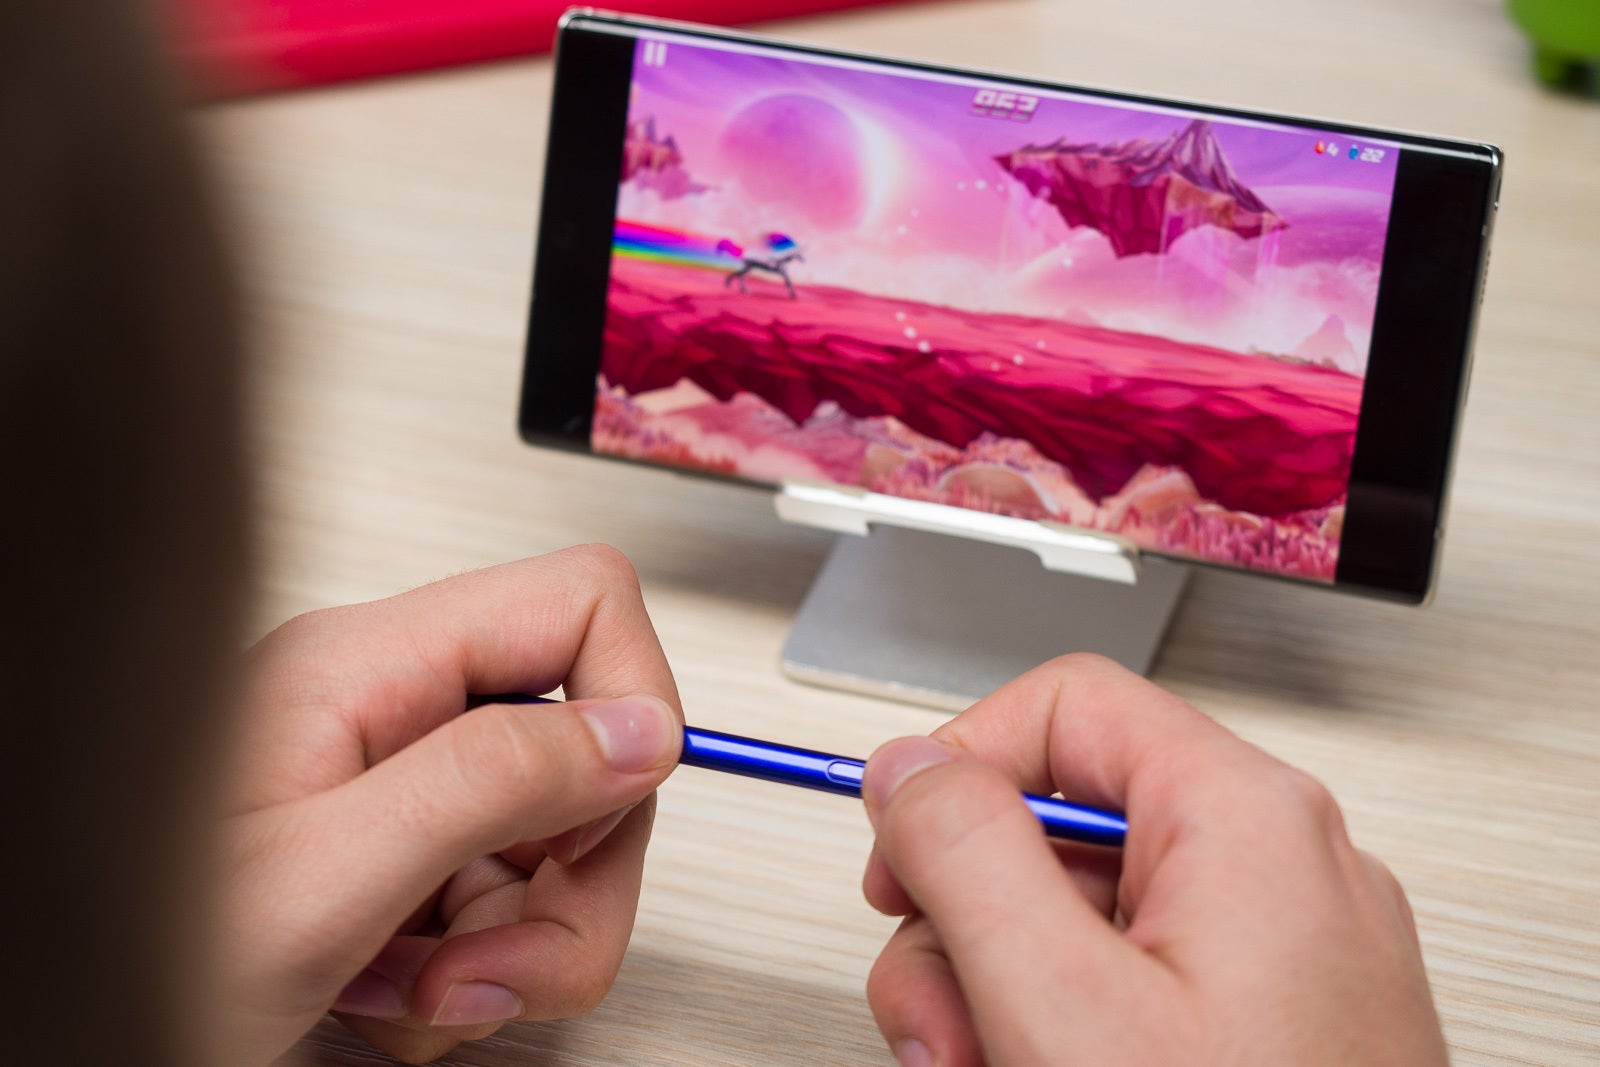 There are plenty of games that only use require two buttons to play - Where can Samsung go next with the S Pen?